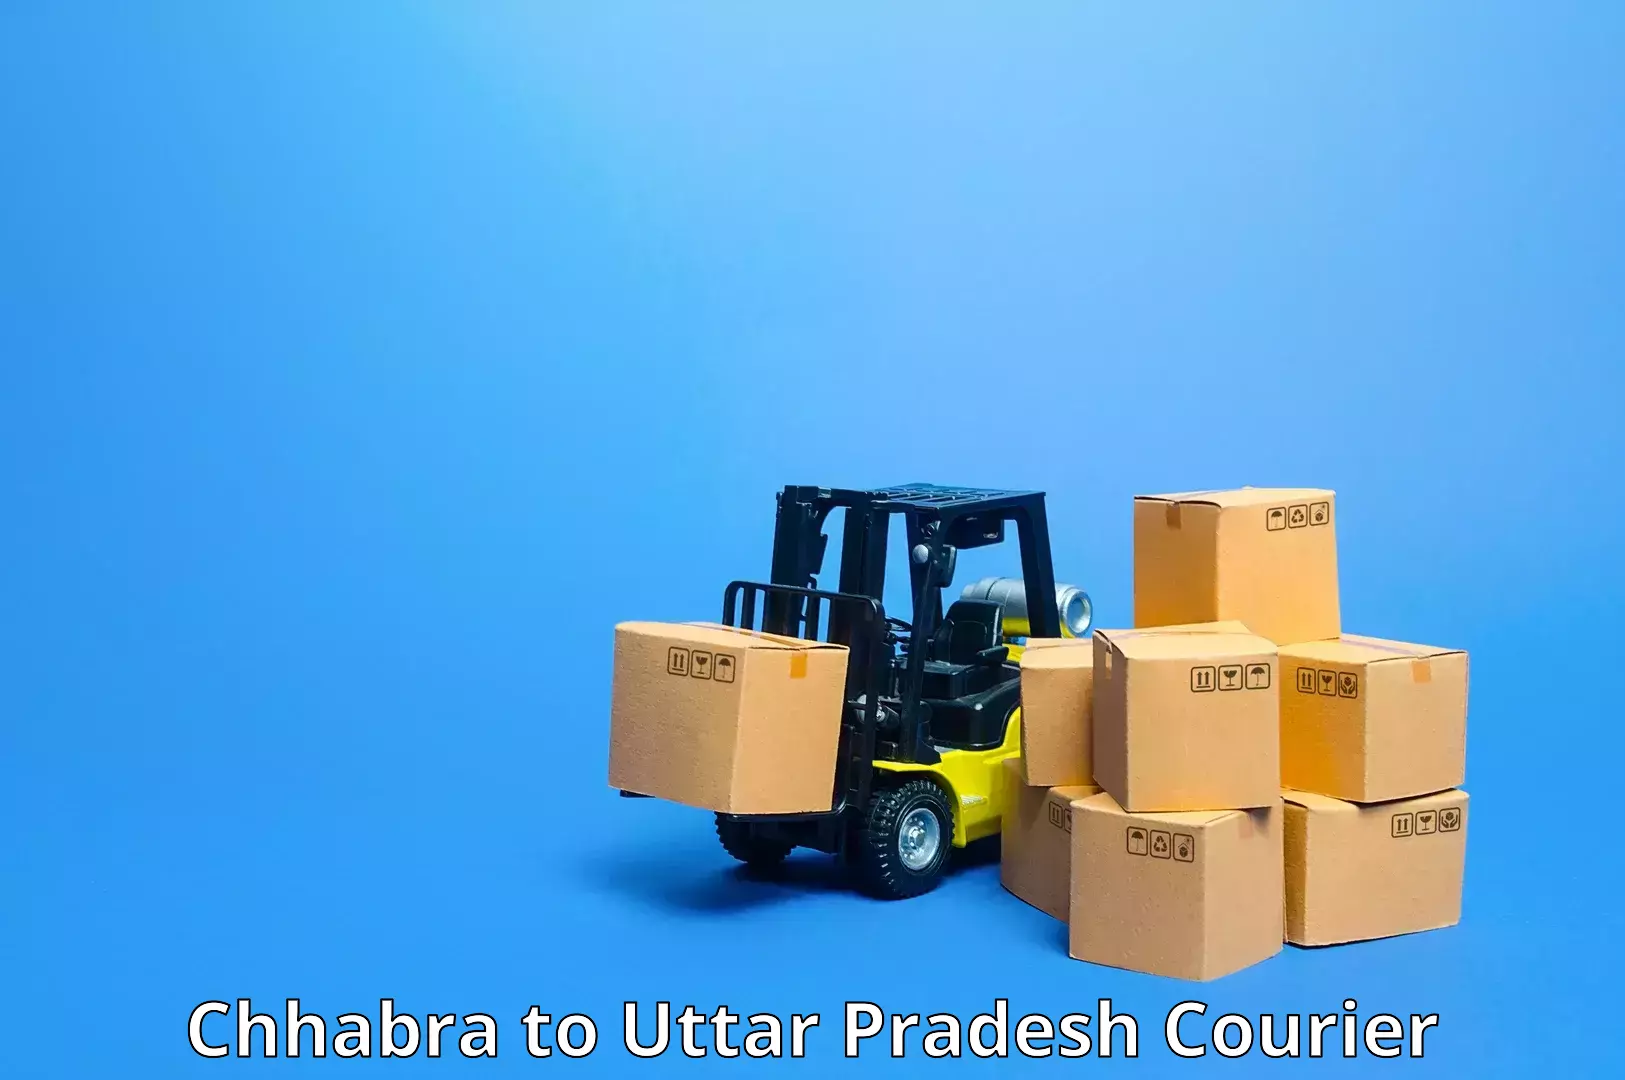 Customer-oriented courier services in Chhabra to Noida